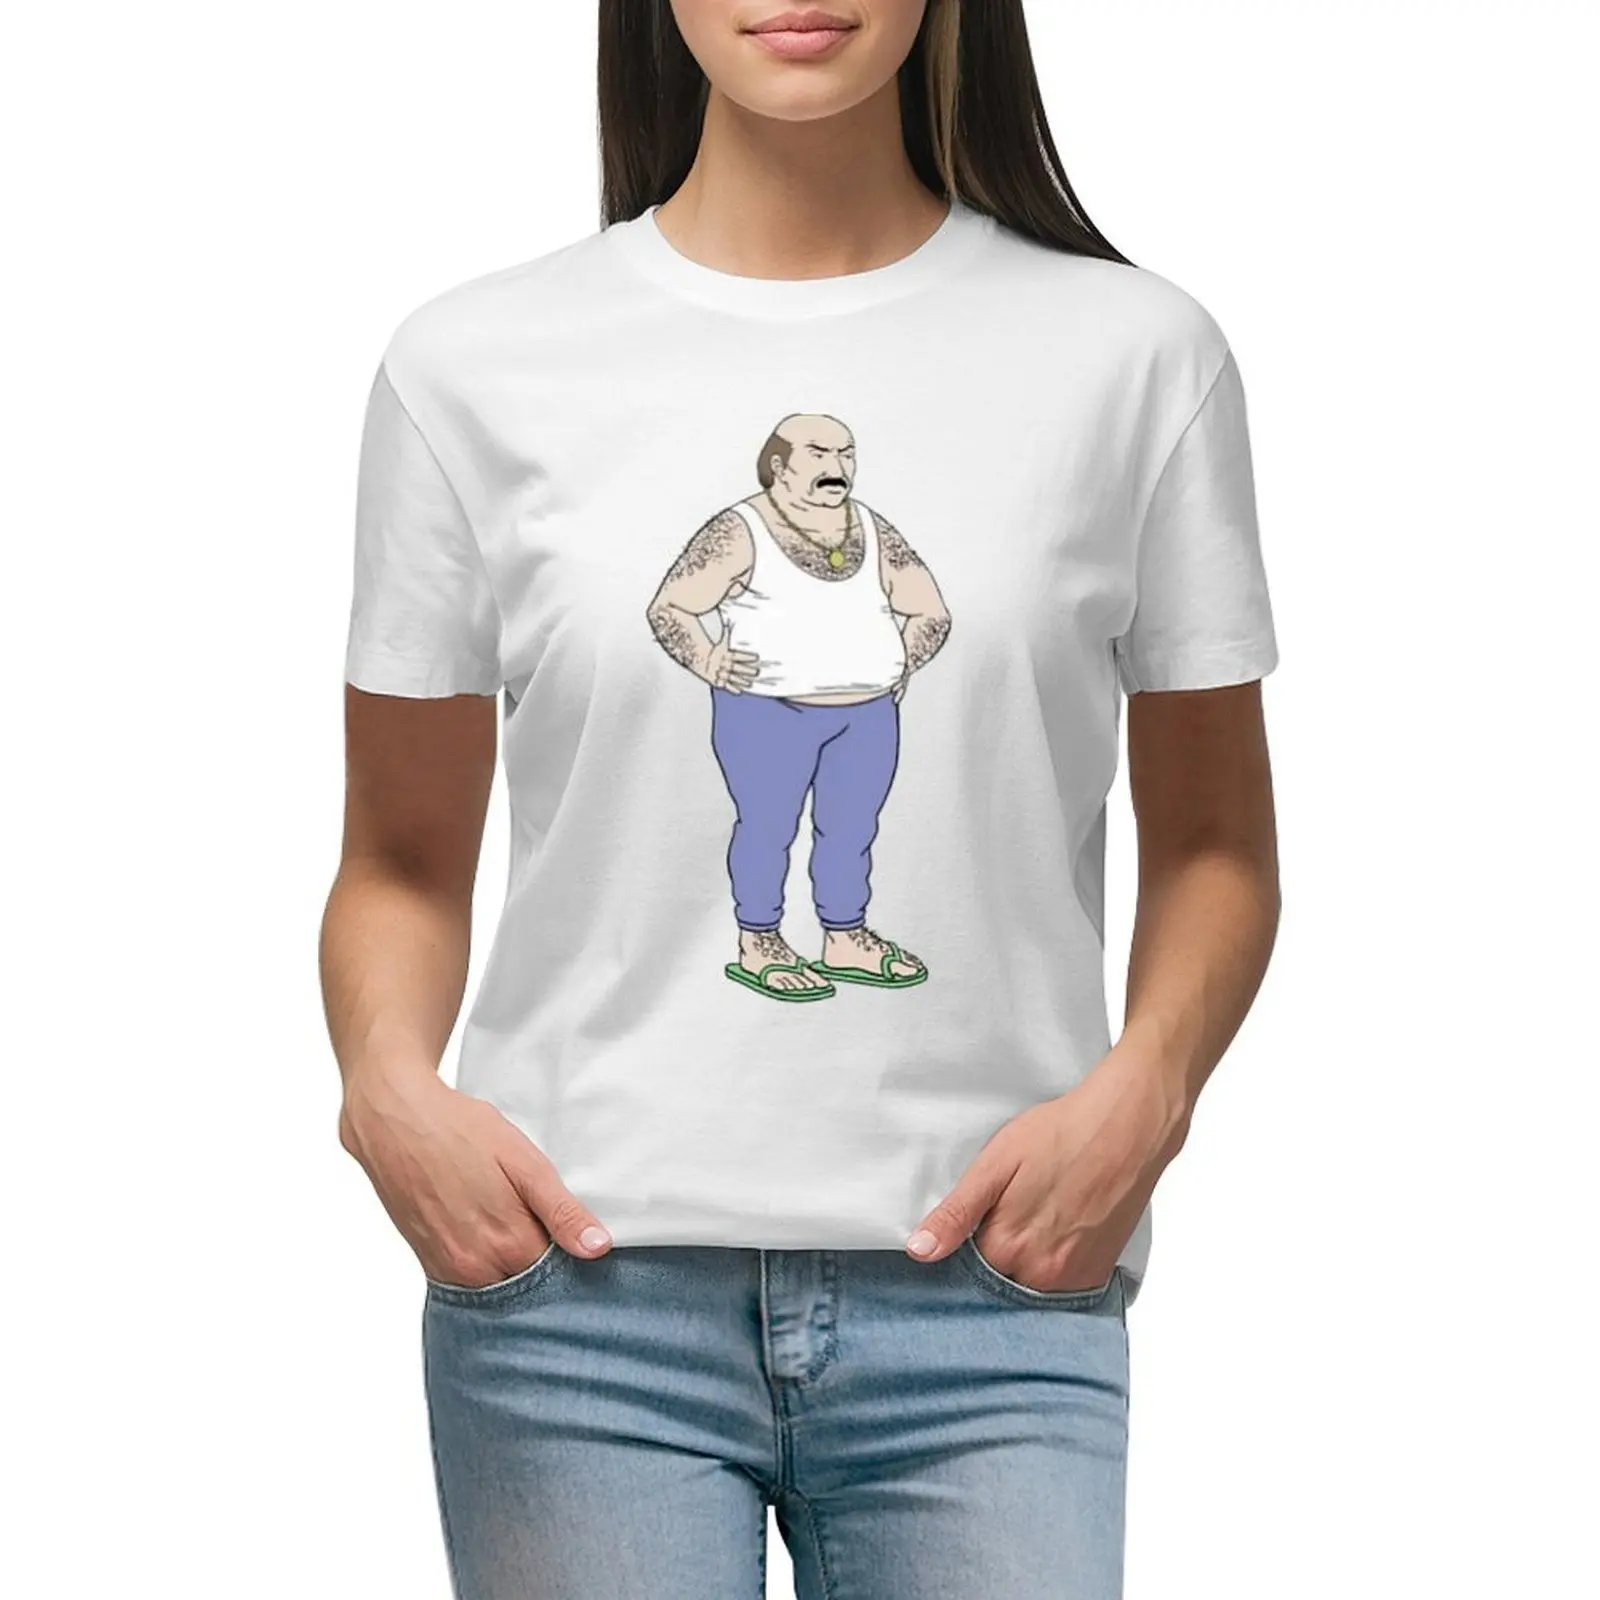 

Aqua teen hunger force Carl angry wearing sandals T-shirt kawaii clothes Aesthetic clothing summer top Womens clothing